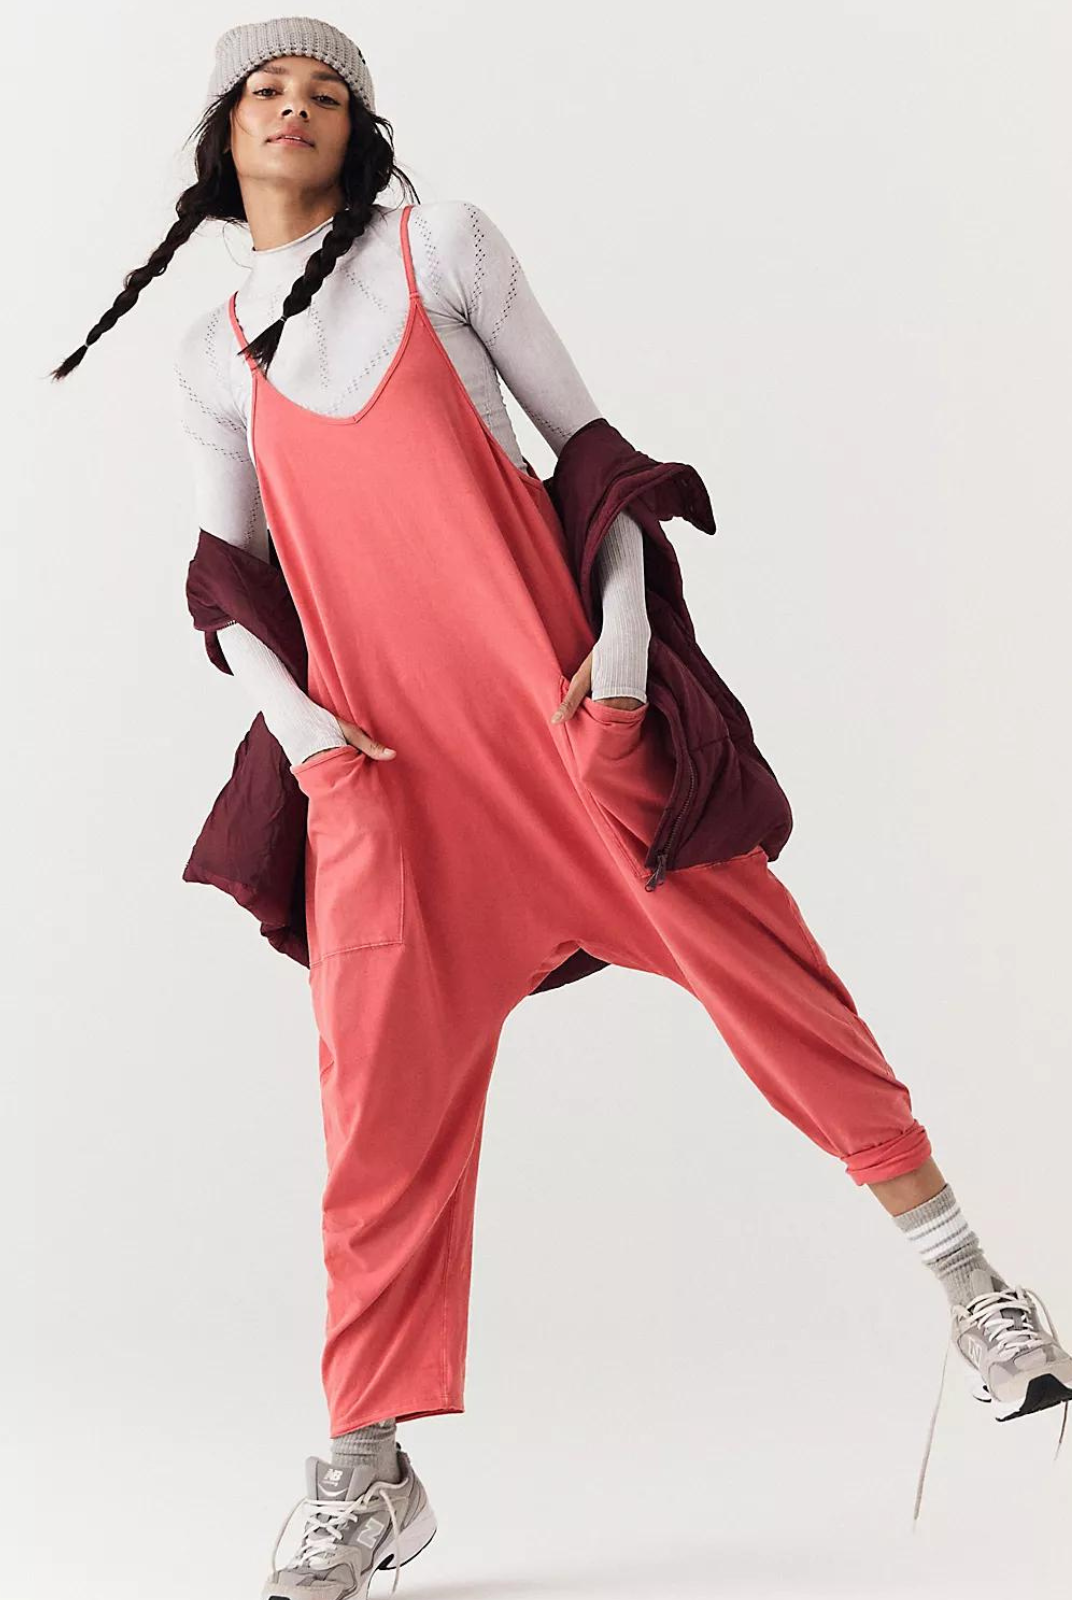 Free People Hot Shot Onesie- Red. This soft and comfy onesie features a slouchy, relaxed-fitting design with a dropped crotch and convenient side pockets.